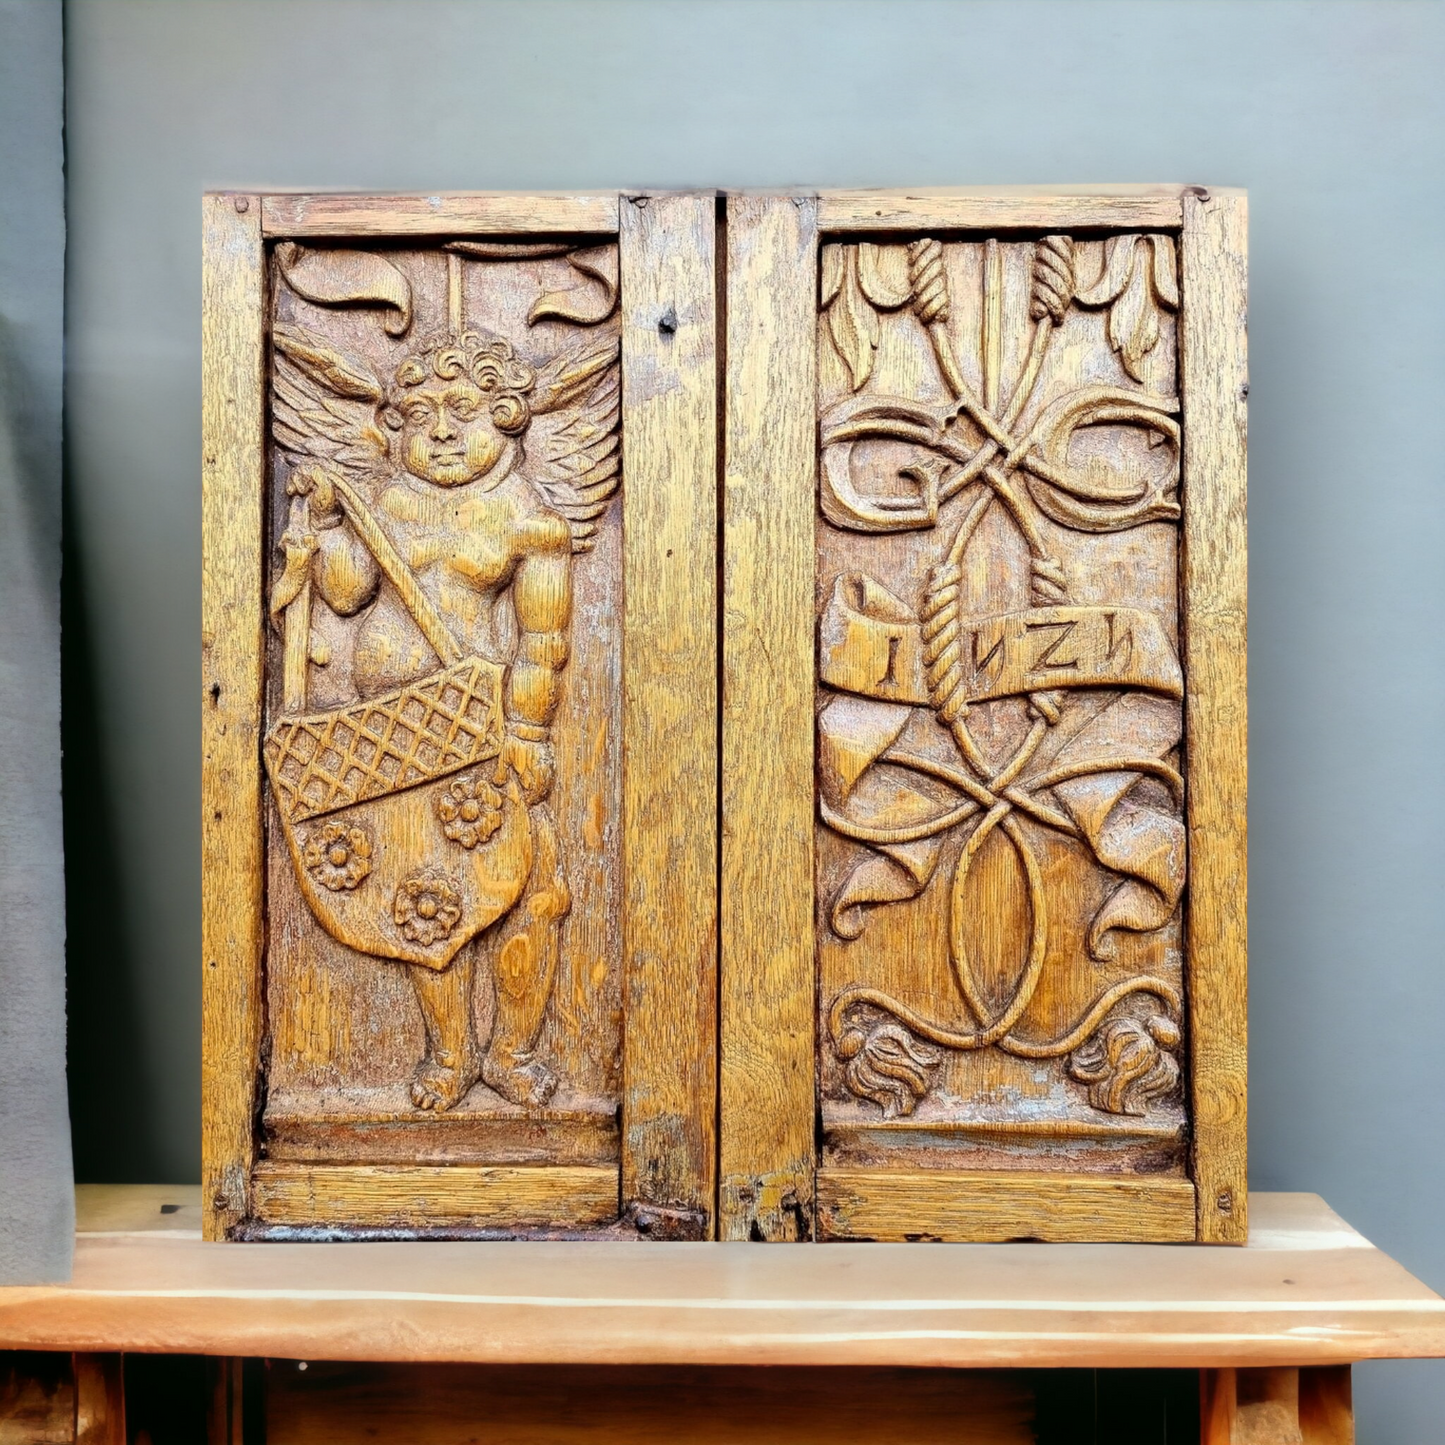 Pair of Early 16th Century Antique Carved Oak Window Shutters, Dated "1525" & Bearing the Initials "GC"